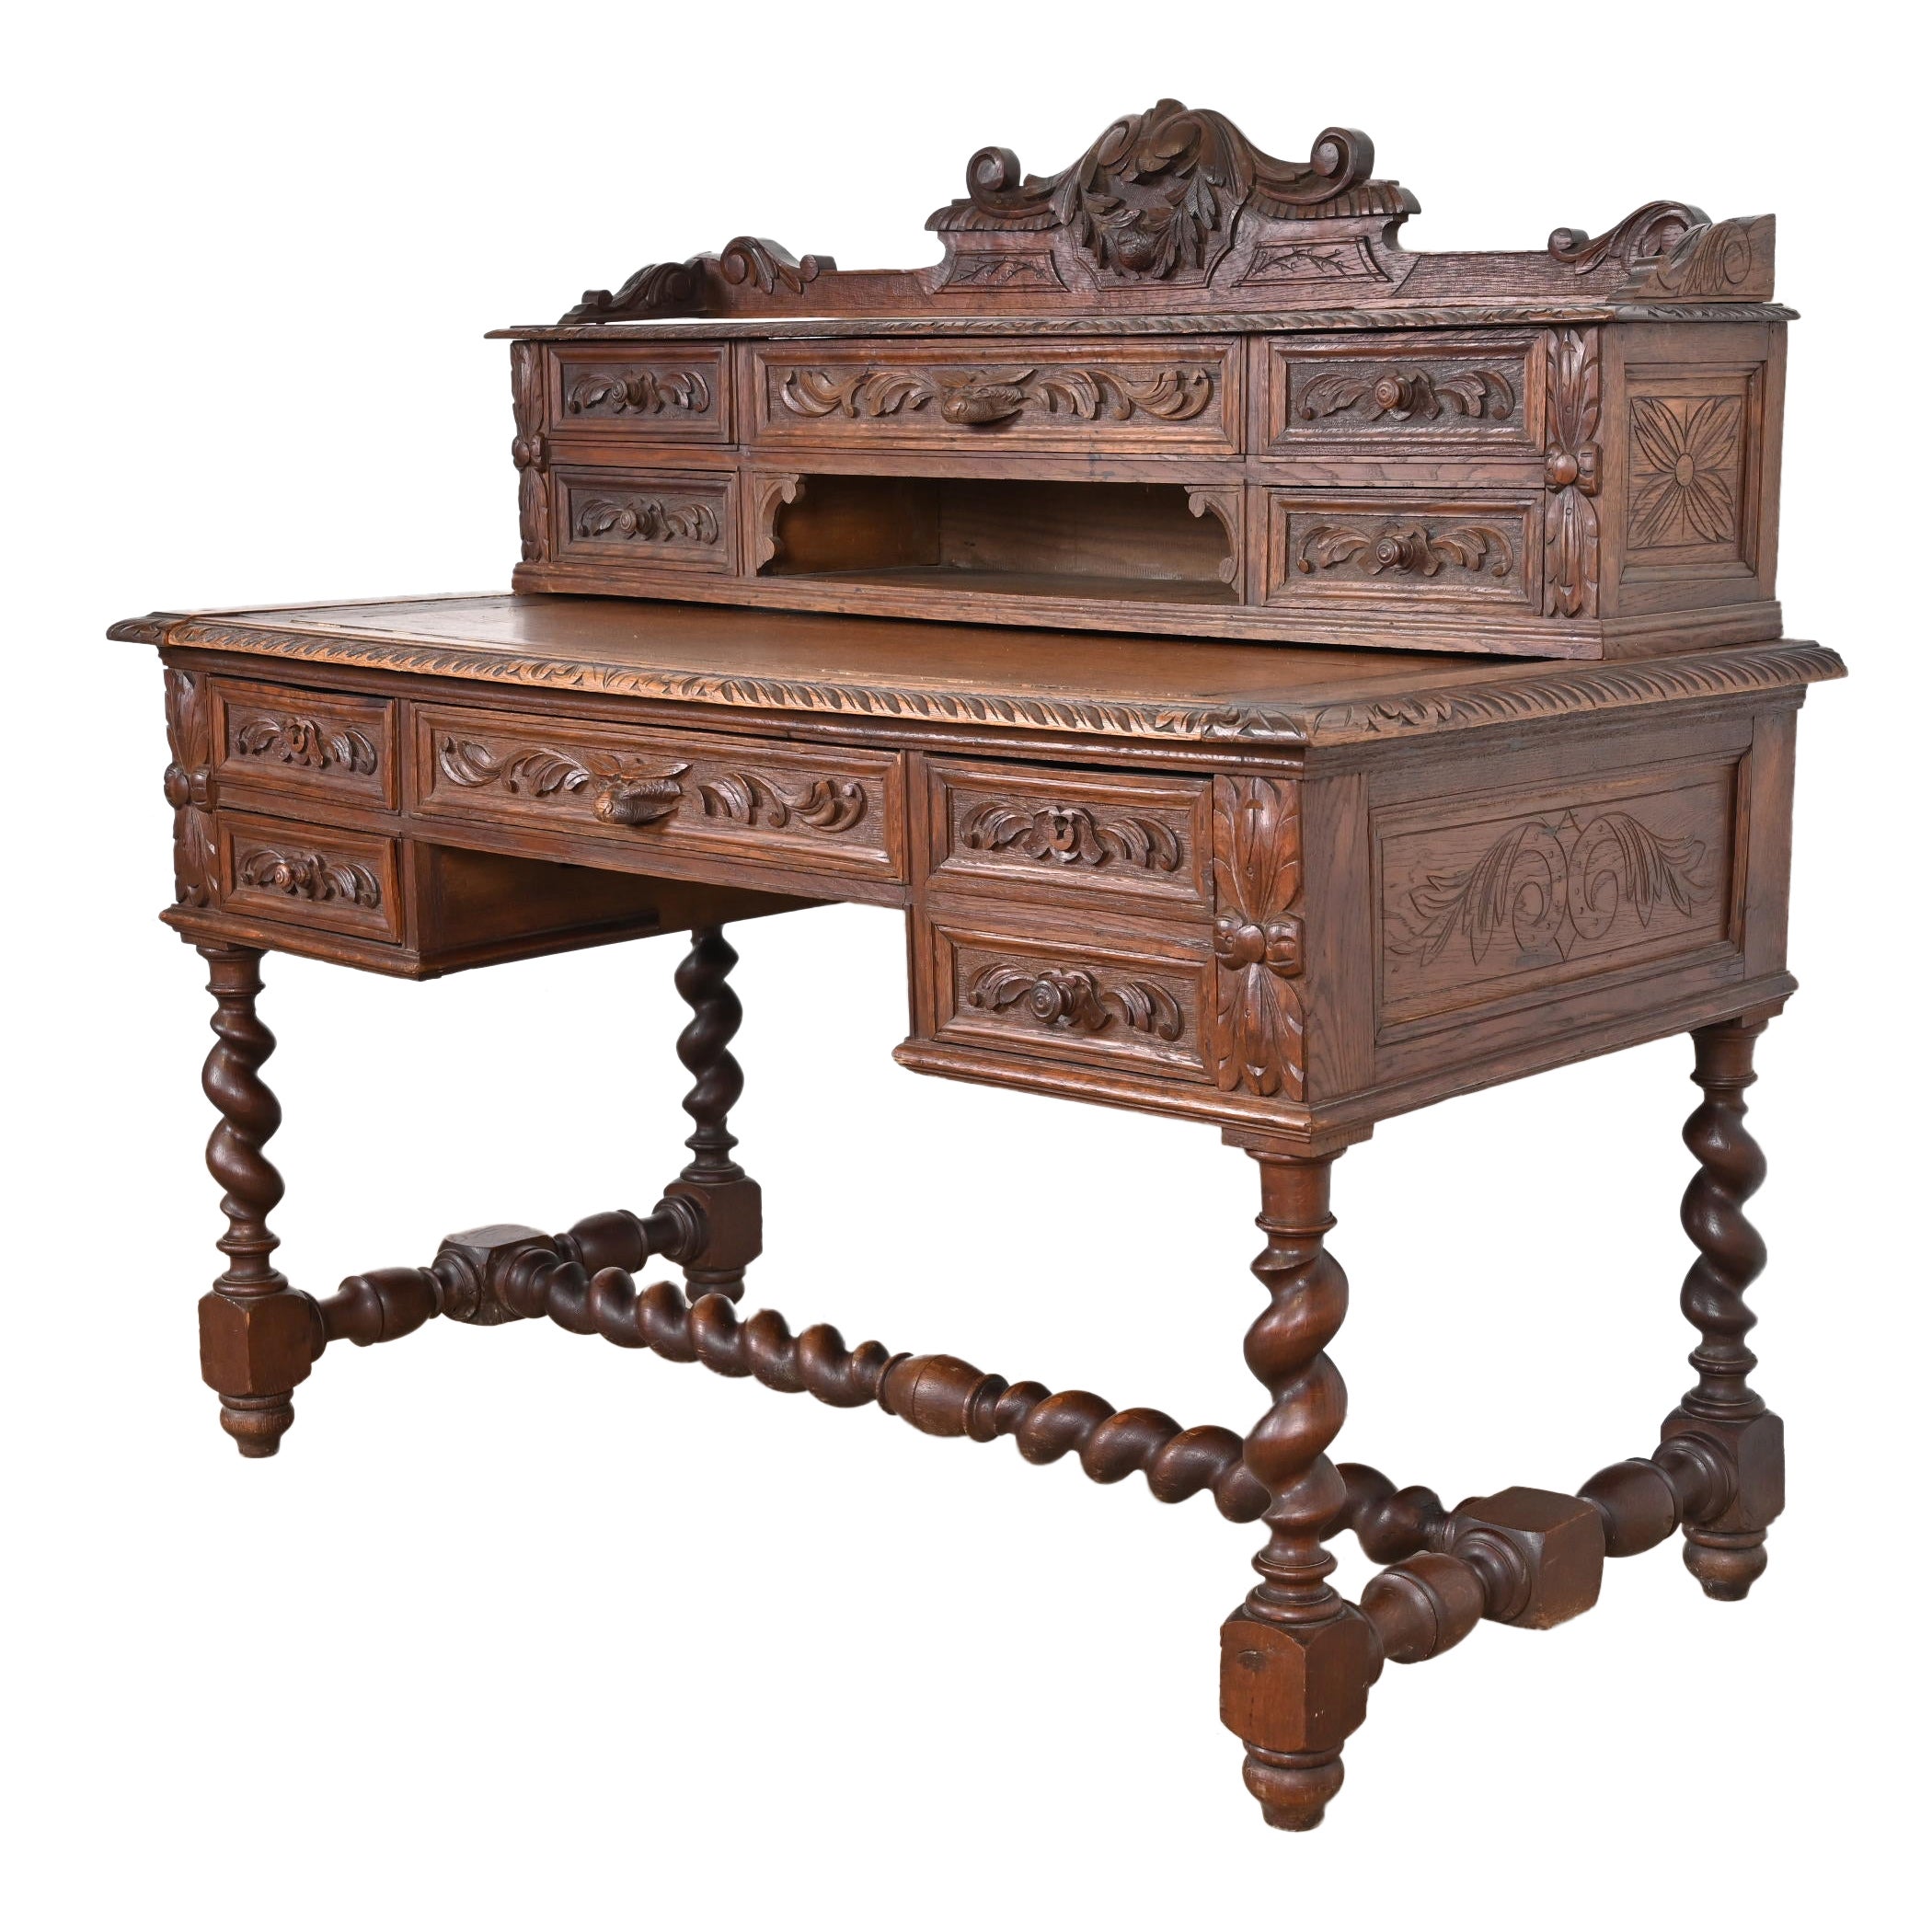 19th Century French Black Forest Carved Oak Writing Desk With Barley Twist Legs For Sale